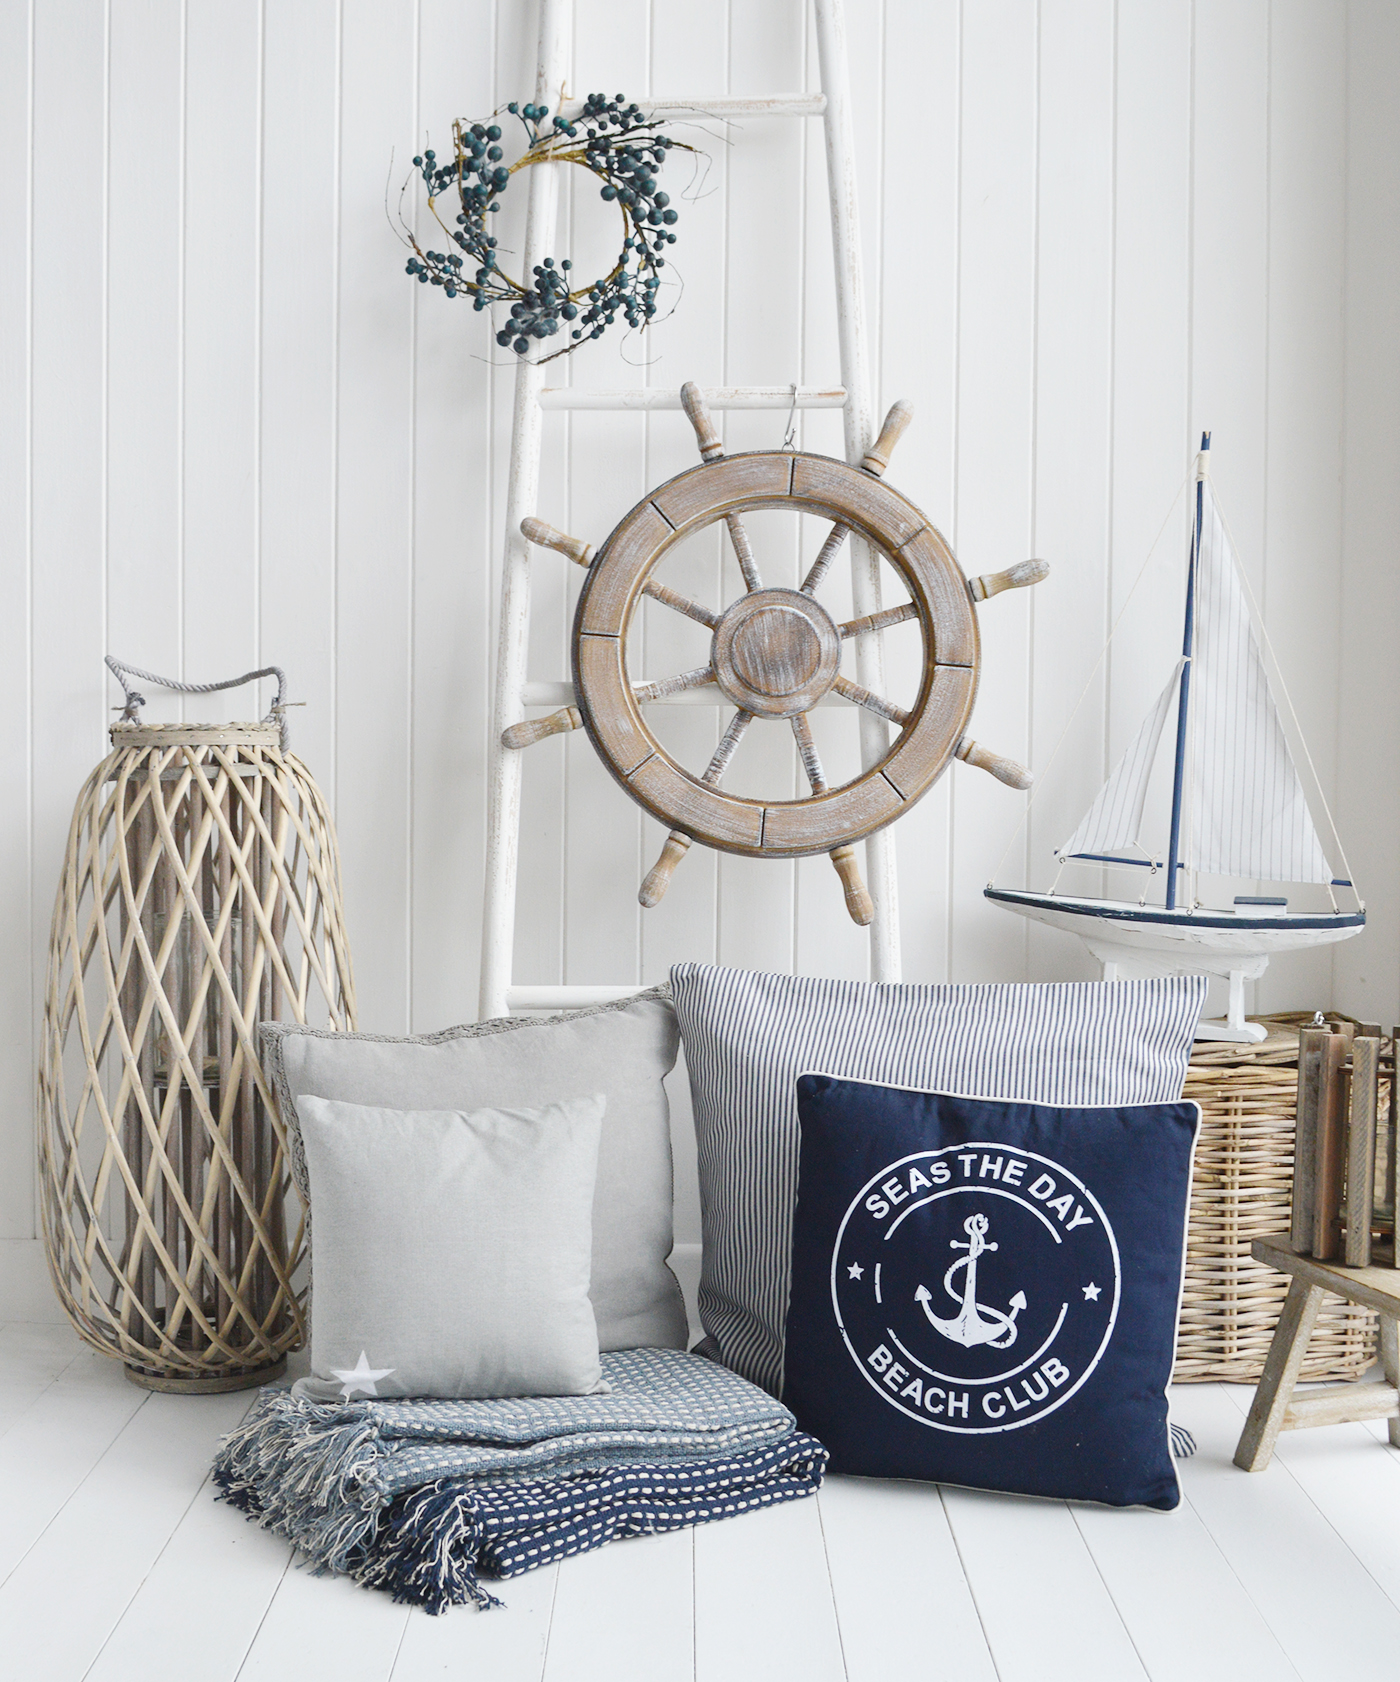 Coastal, nautical and beach house style accessories for home interiors. New England furniture and home decor